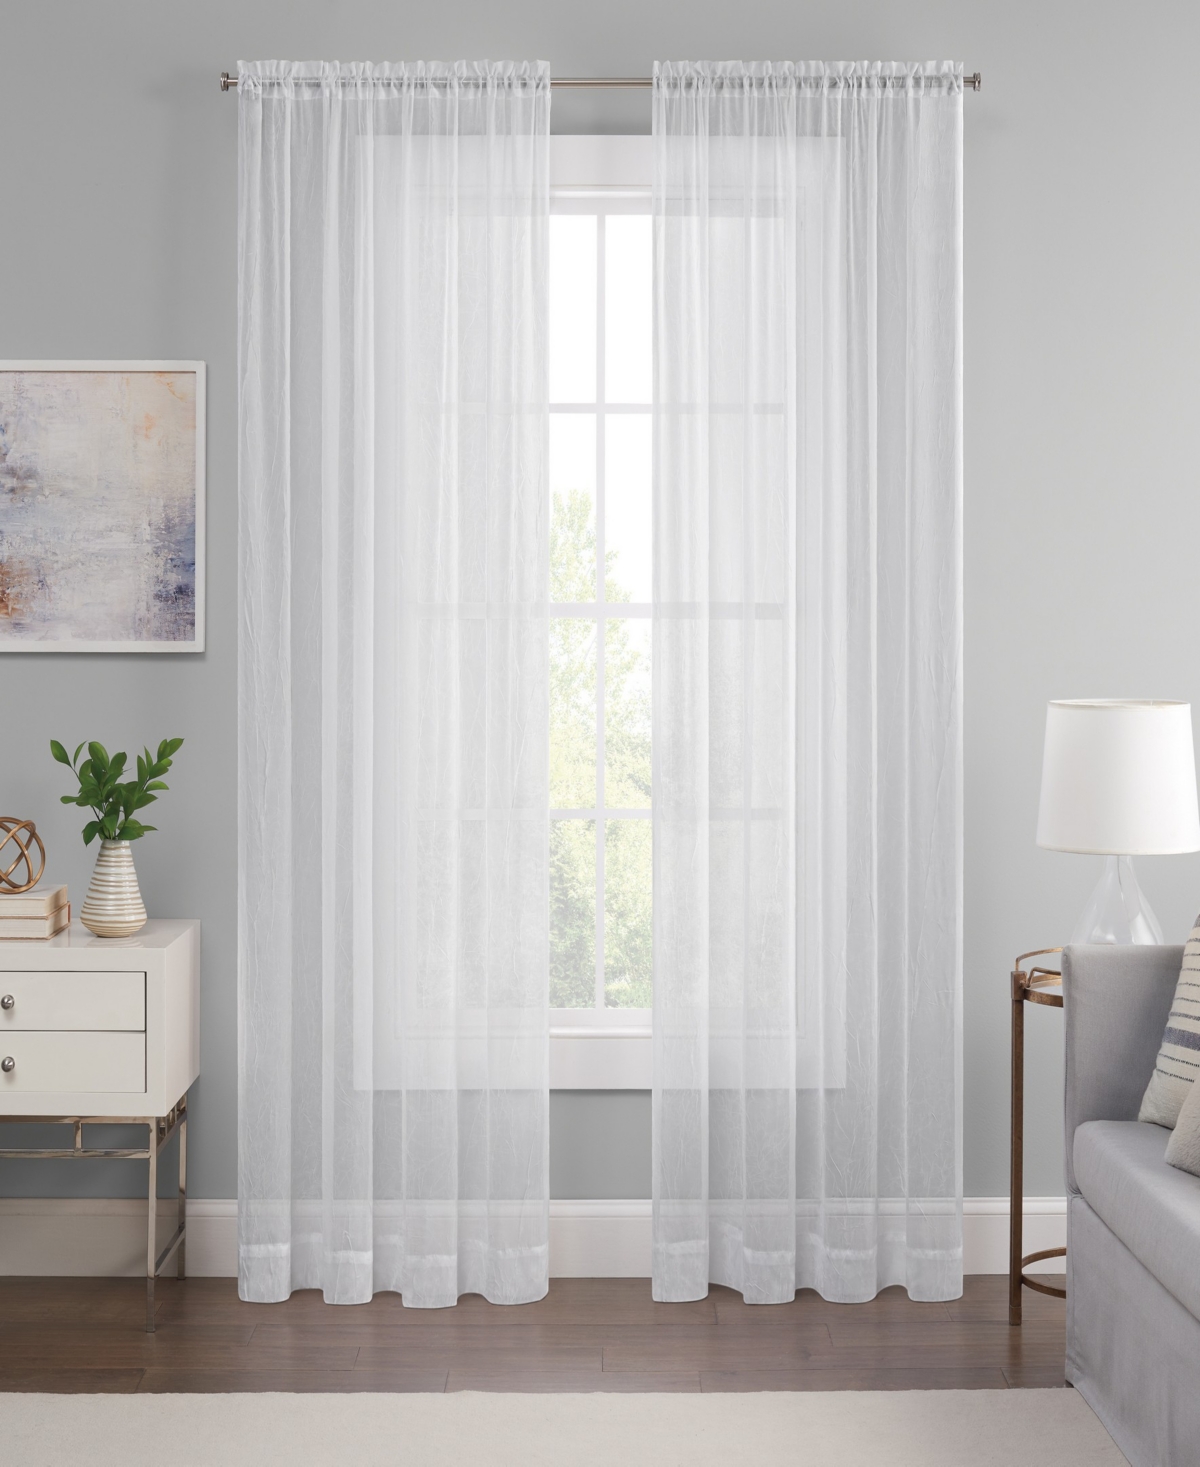 Eclipse Emina Crushed Sheer Voile Rod Pocket Curtain Panel, 52" X 63" In White